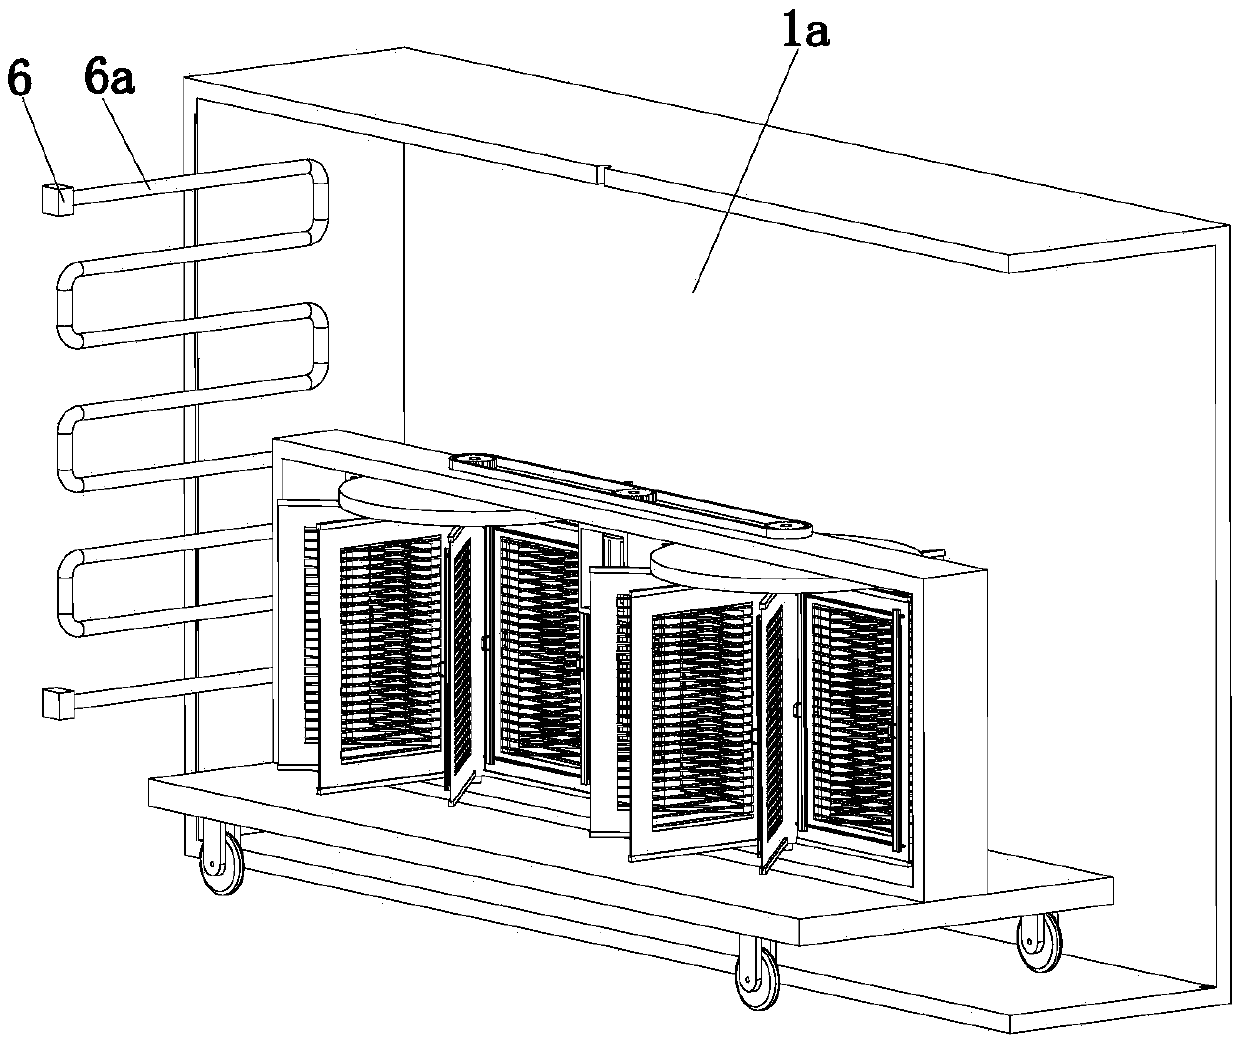 Drying control method for papermaking